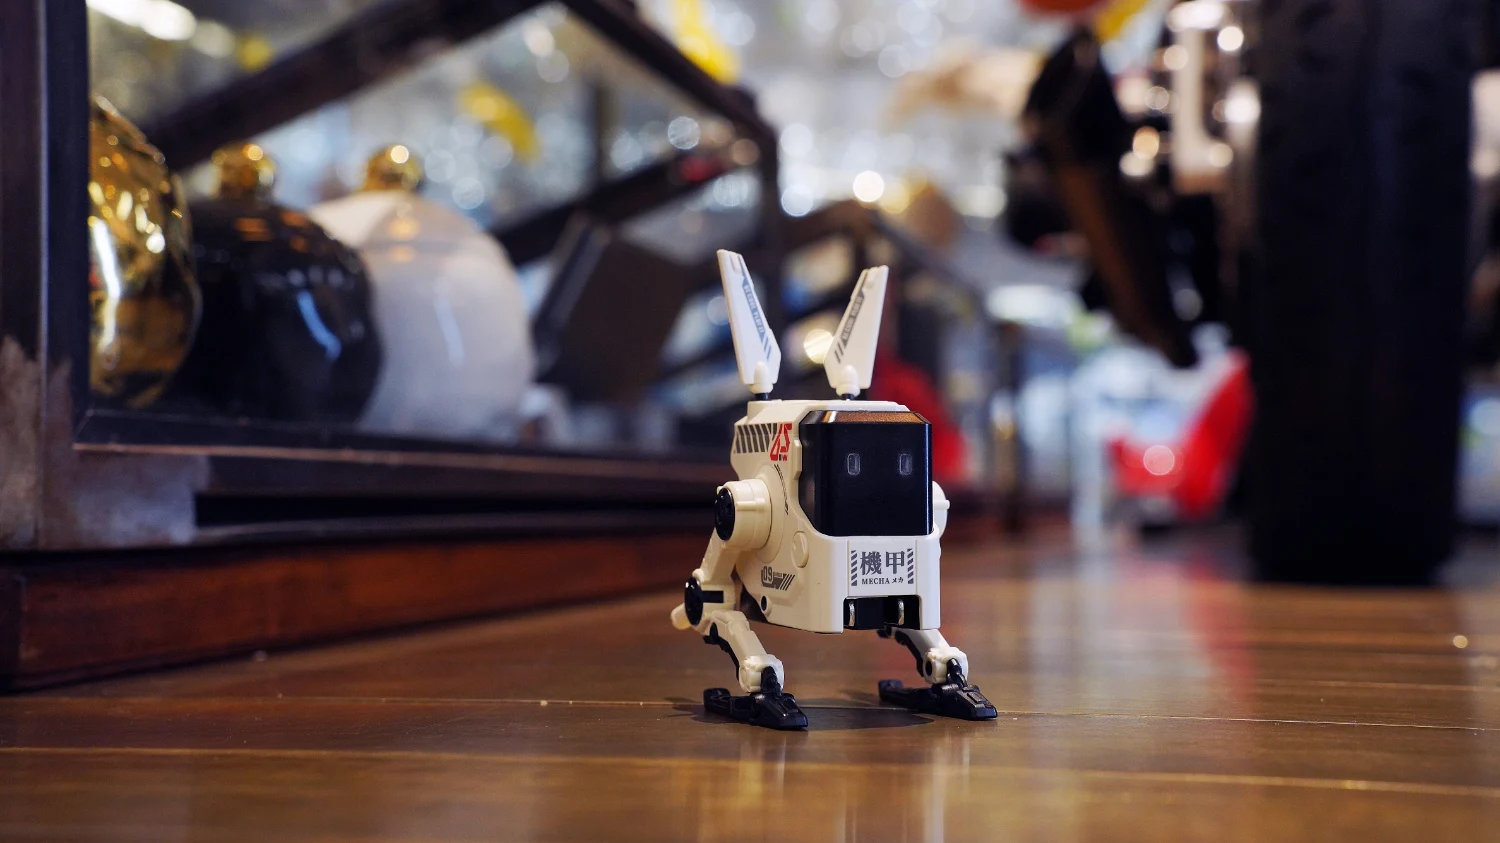 A cute robot charger (mech-inspired) sitting on a wooden desk. Various blurred objects are behind it.